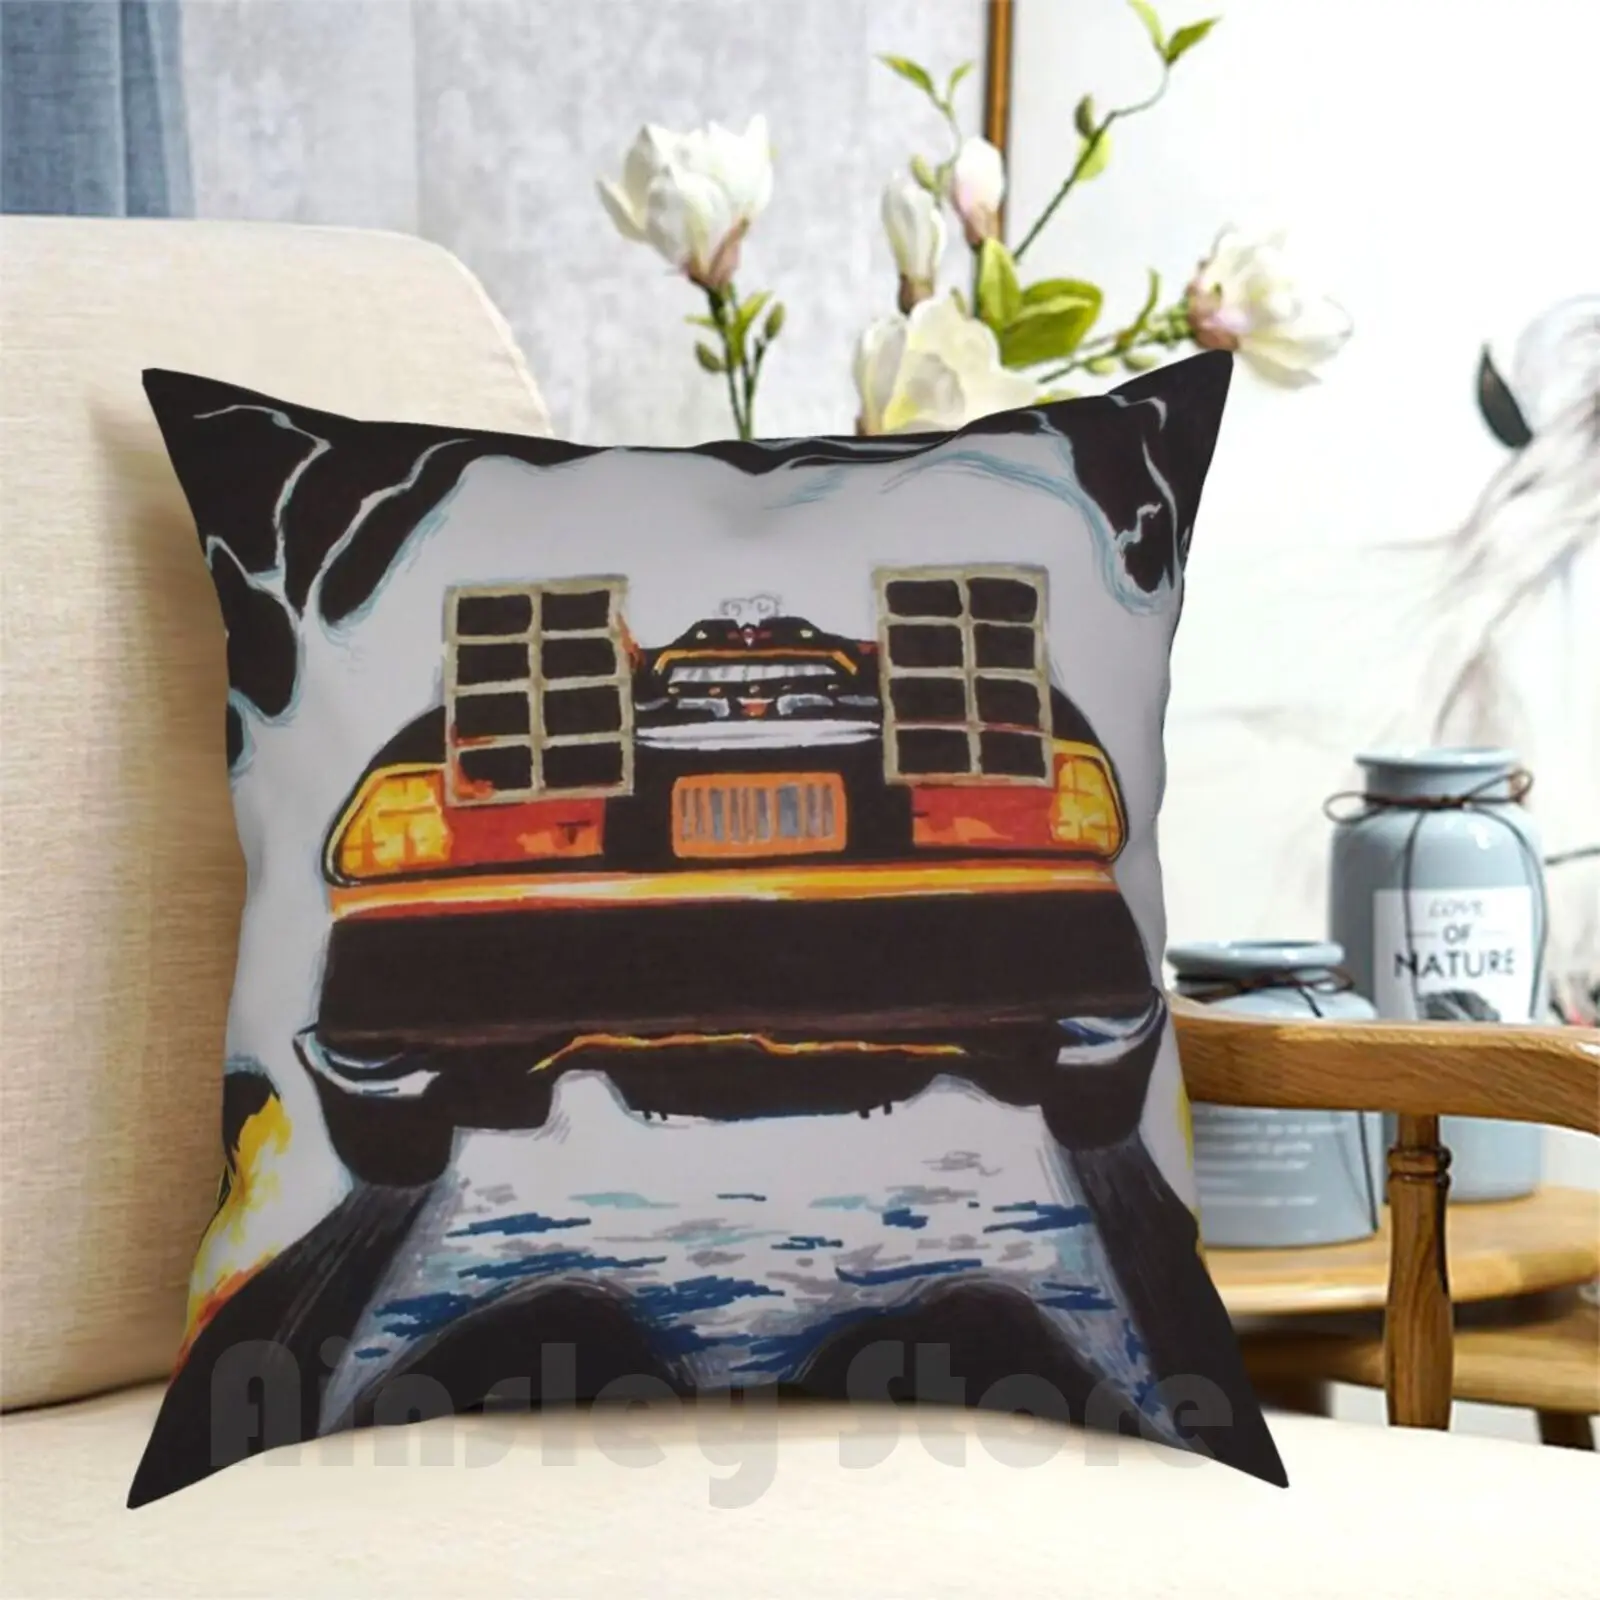 

The Future Is Now Pillow Case Printed Home Soft DIY Pillow cover Back To The Future Back To The Future 2 Time Travel Movies